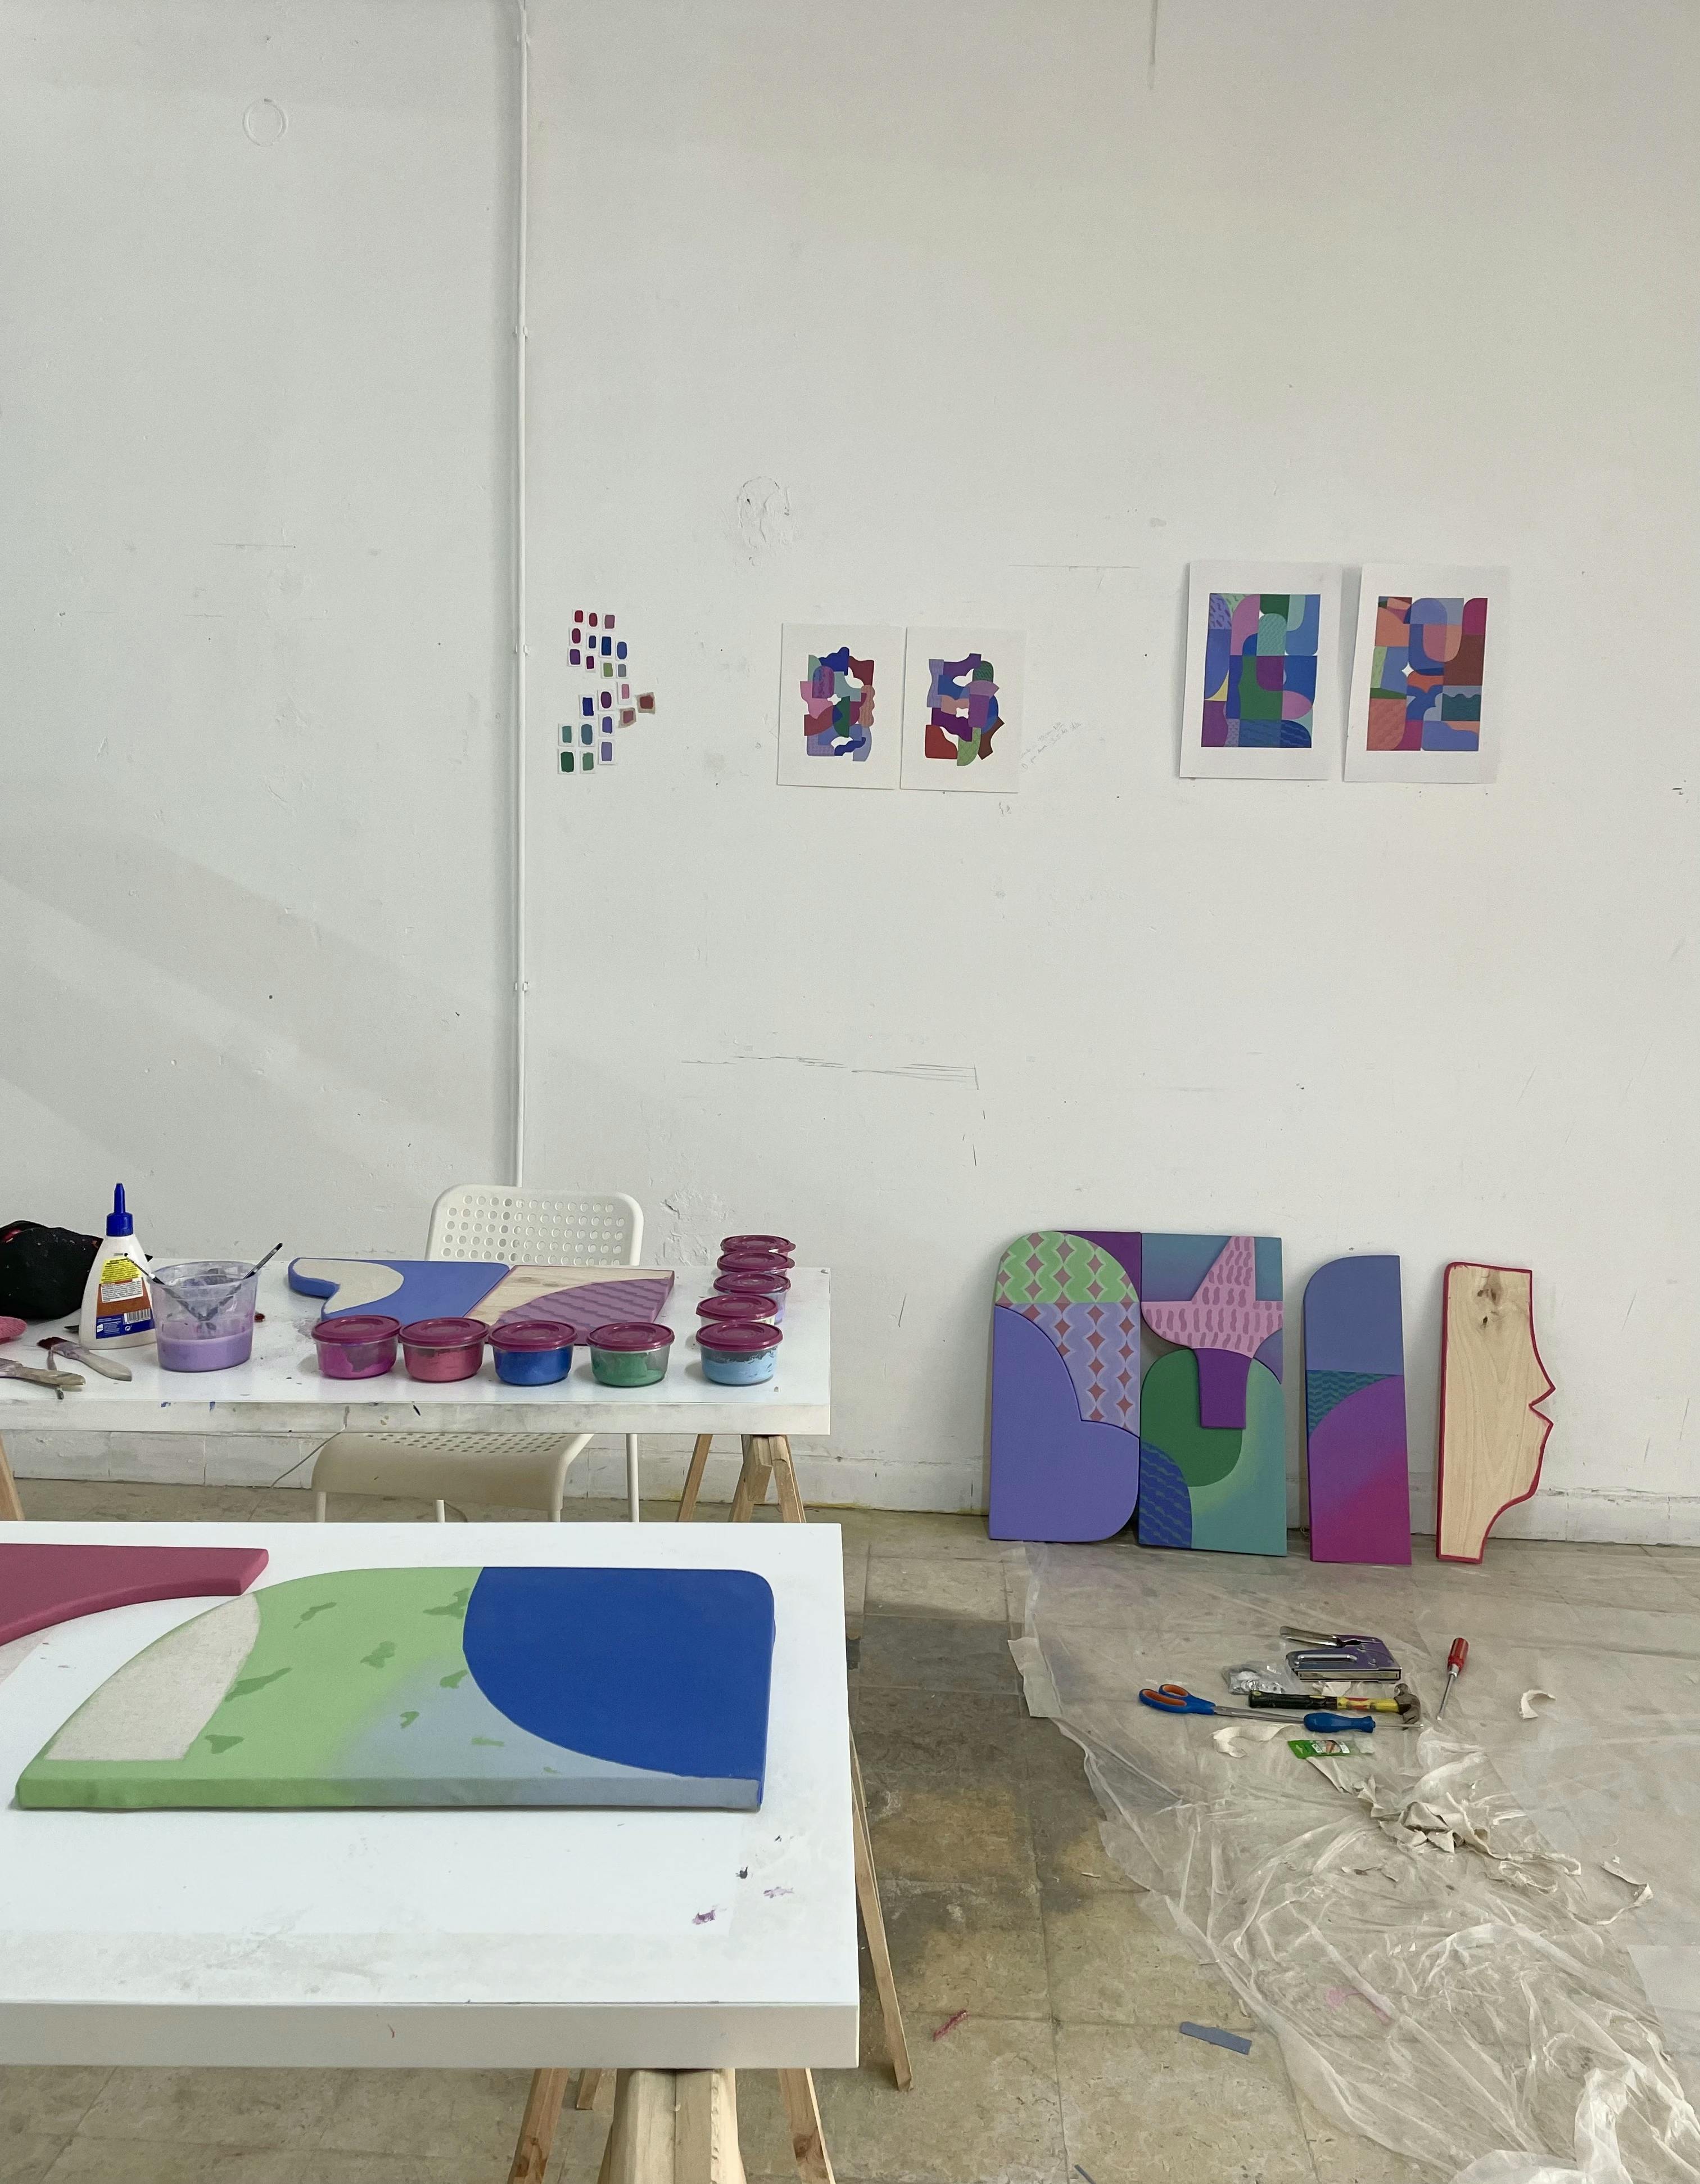 Multicolored drawings and shaped canvases in artist Bbblob's studio.